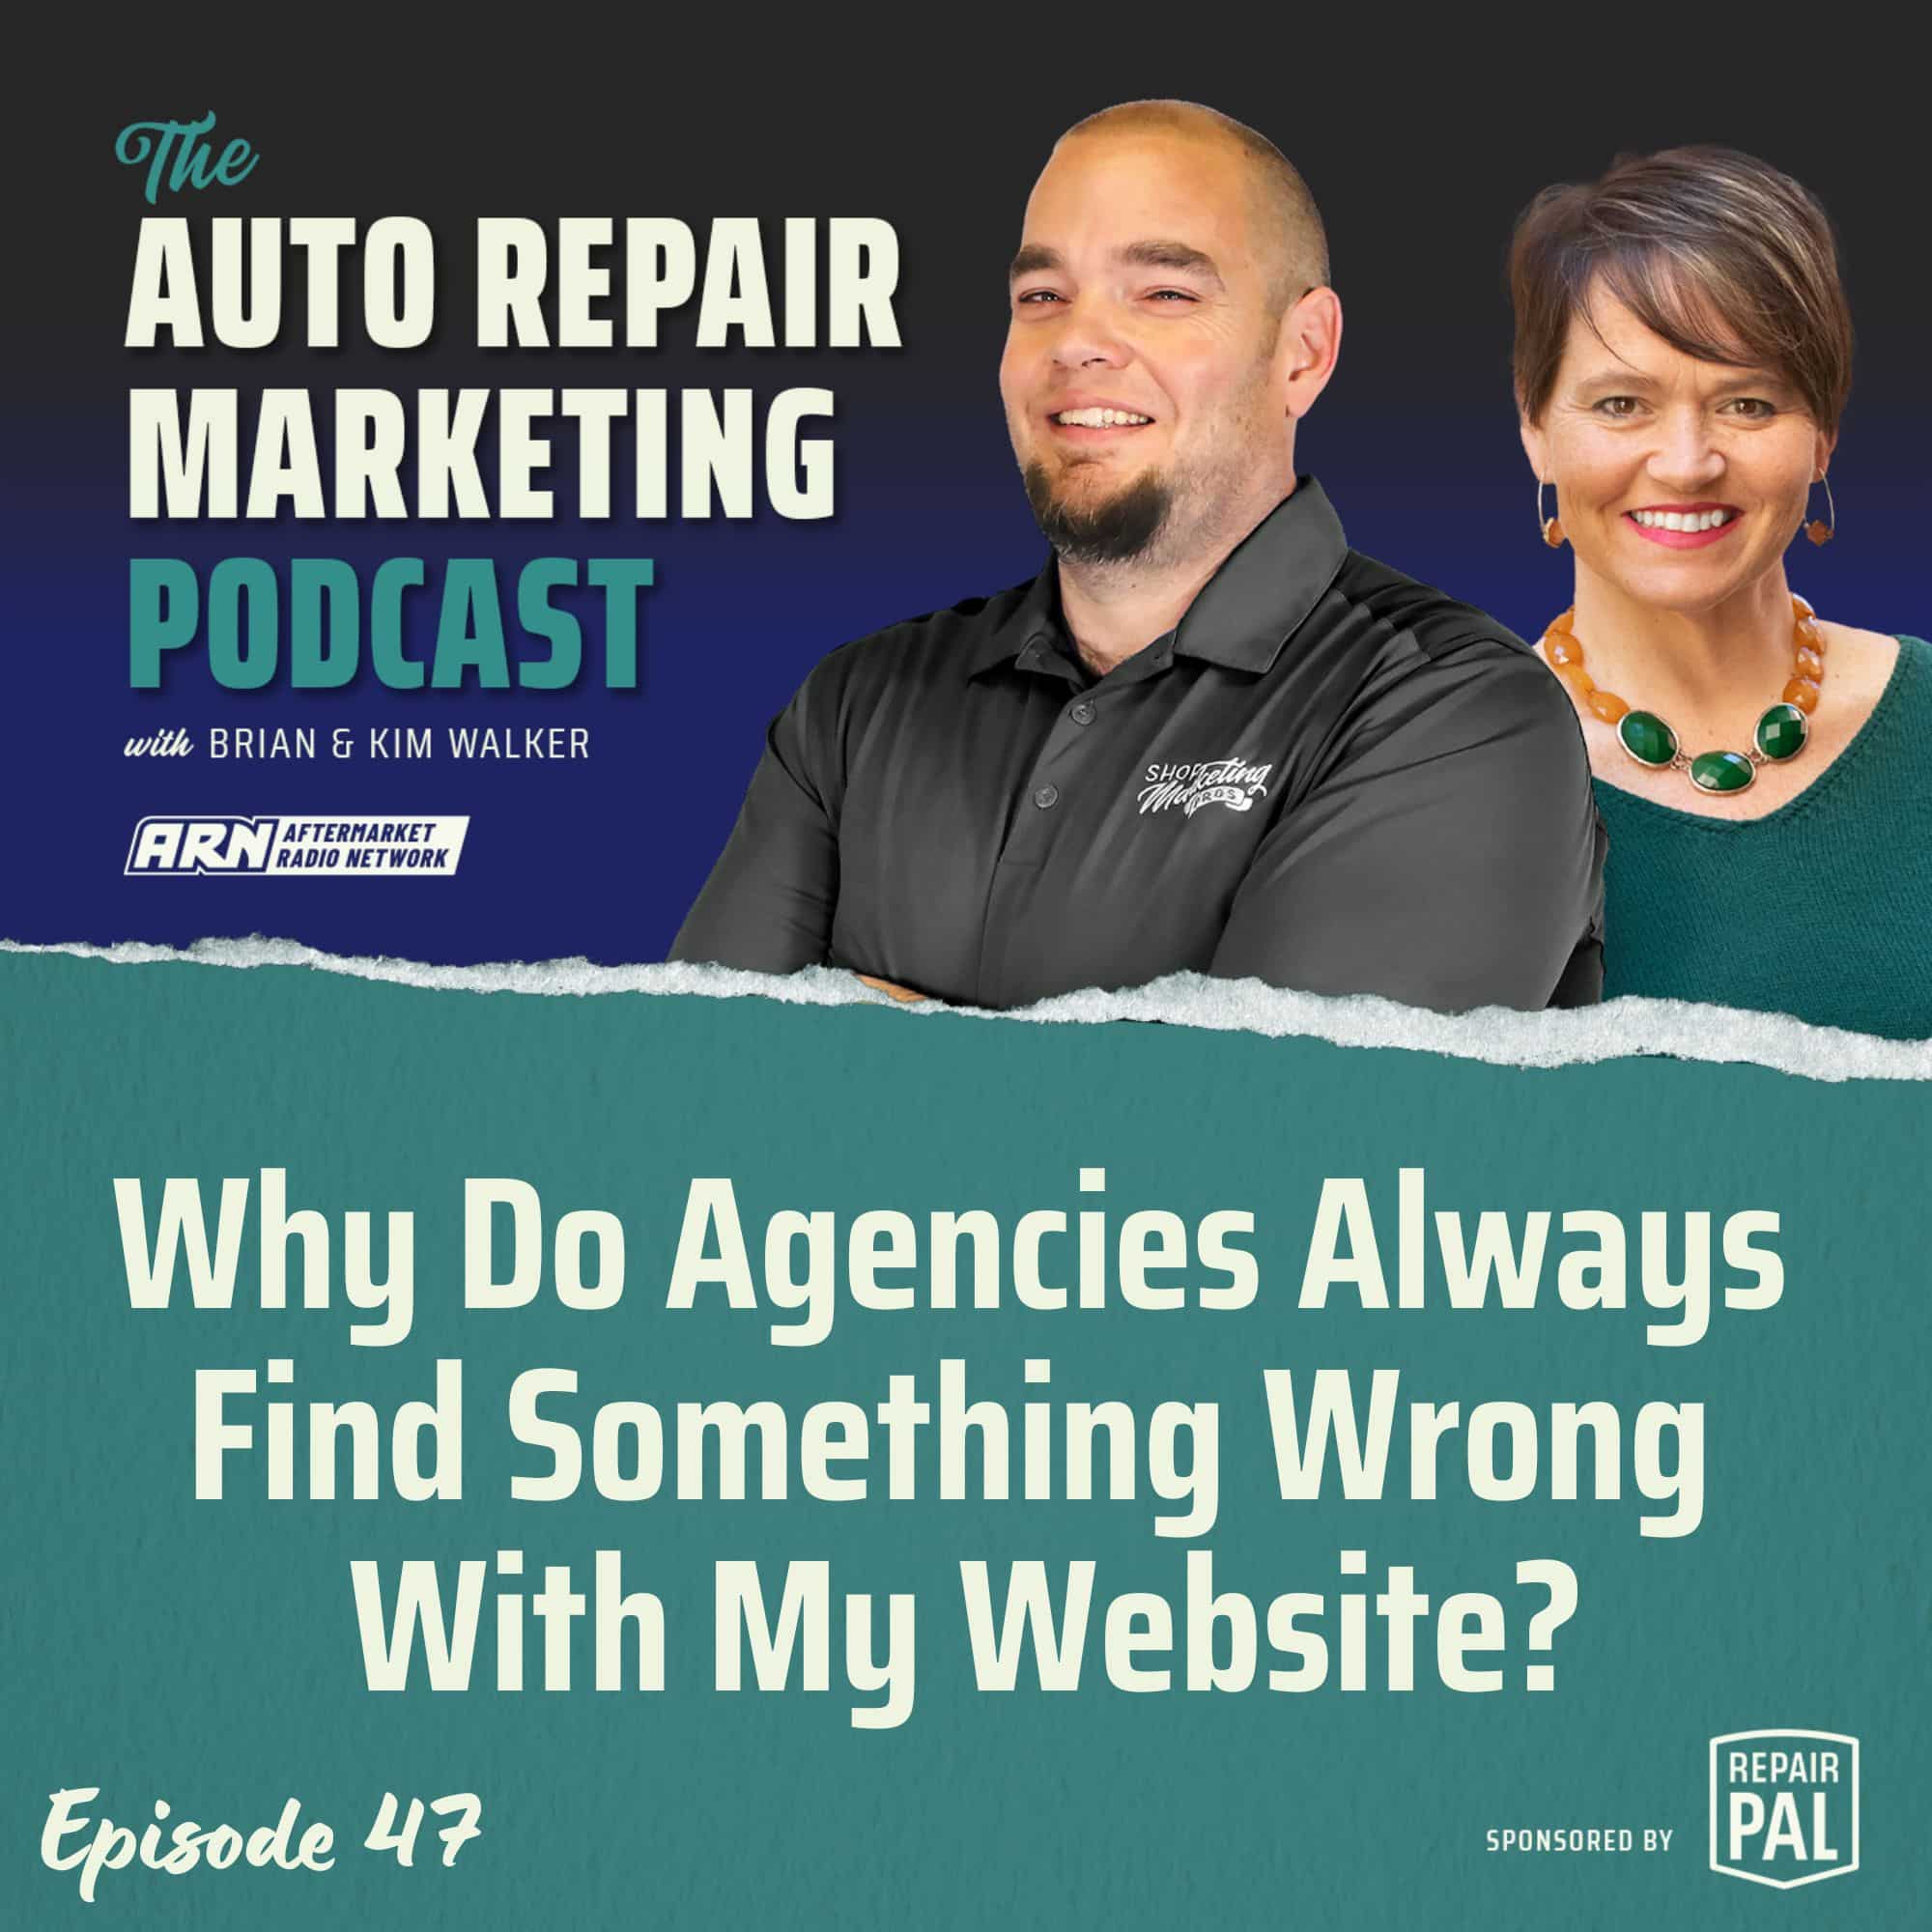 The Auto Repair Marketing Podcast Episode 47. Brian & Kim Walker talking about the topic "Why Do Agencies Always Find Something Wrong With My Website?". Sponsored by Repair Pal.